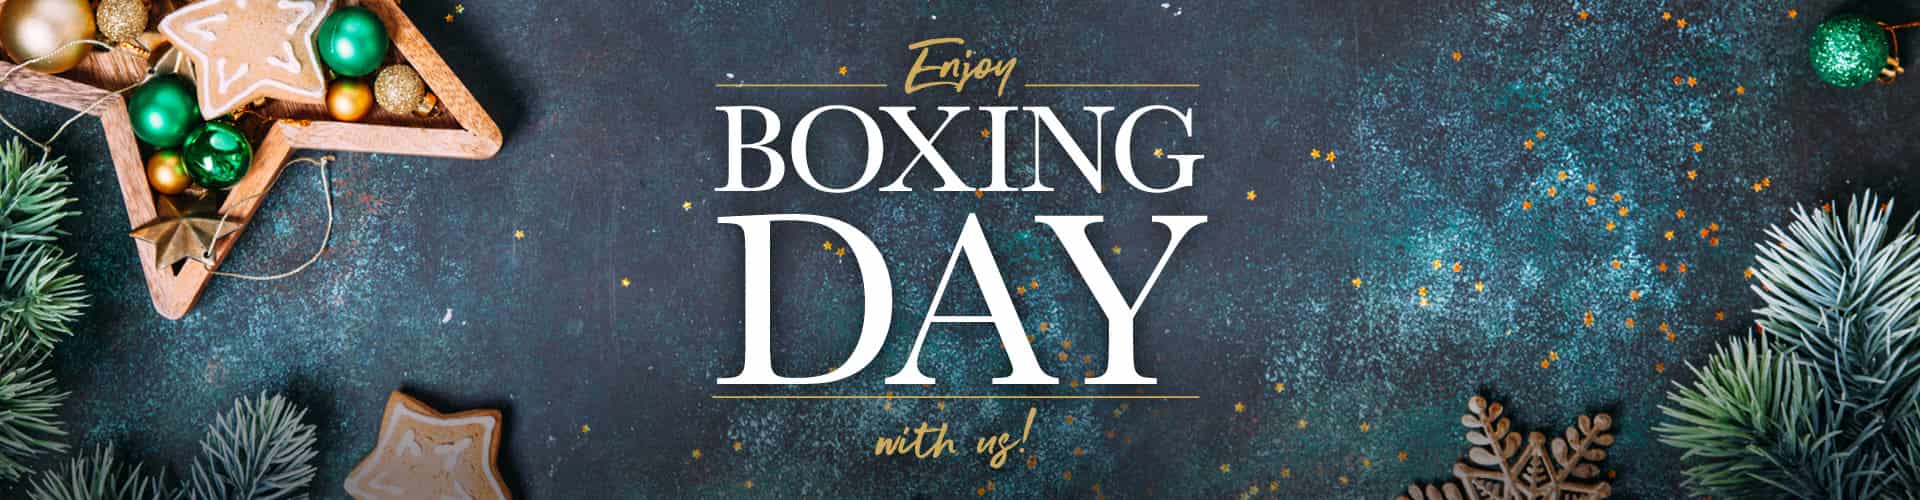 Enjoy Boxing Day with us at Village Inn